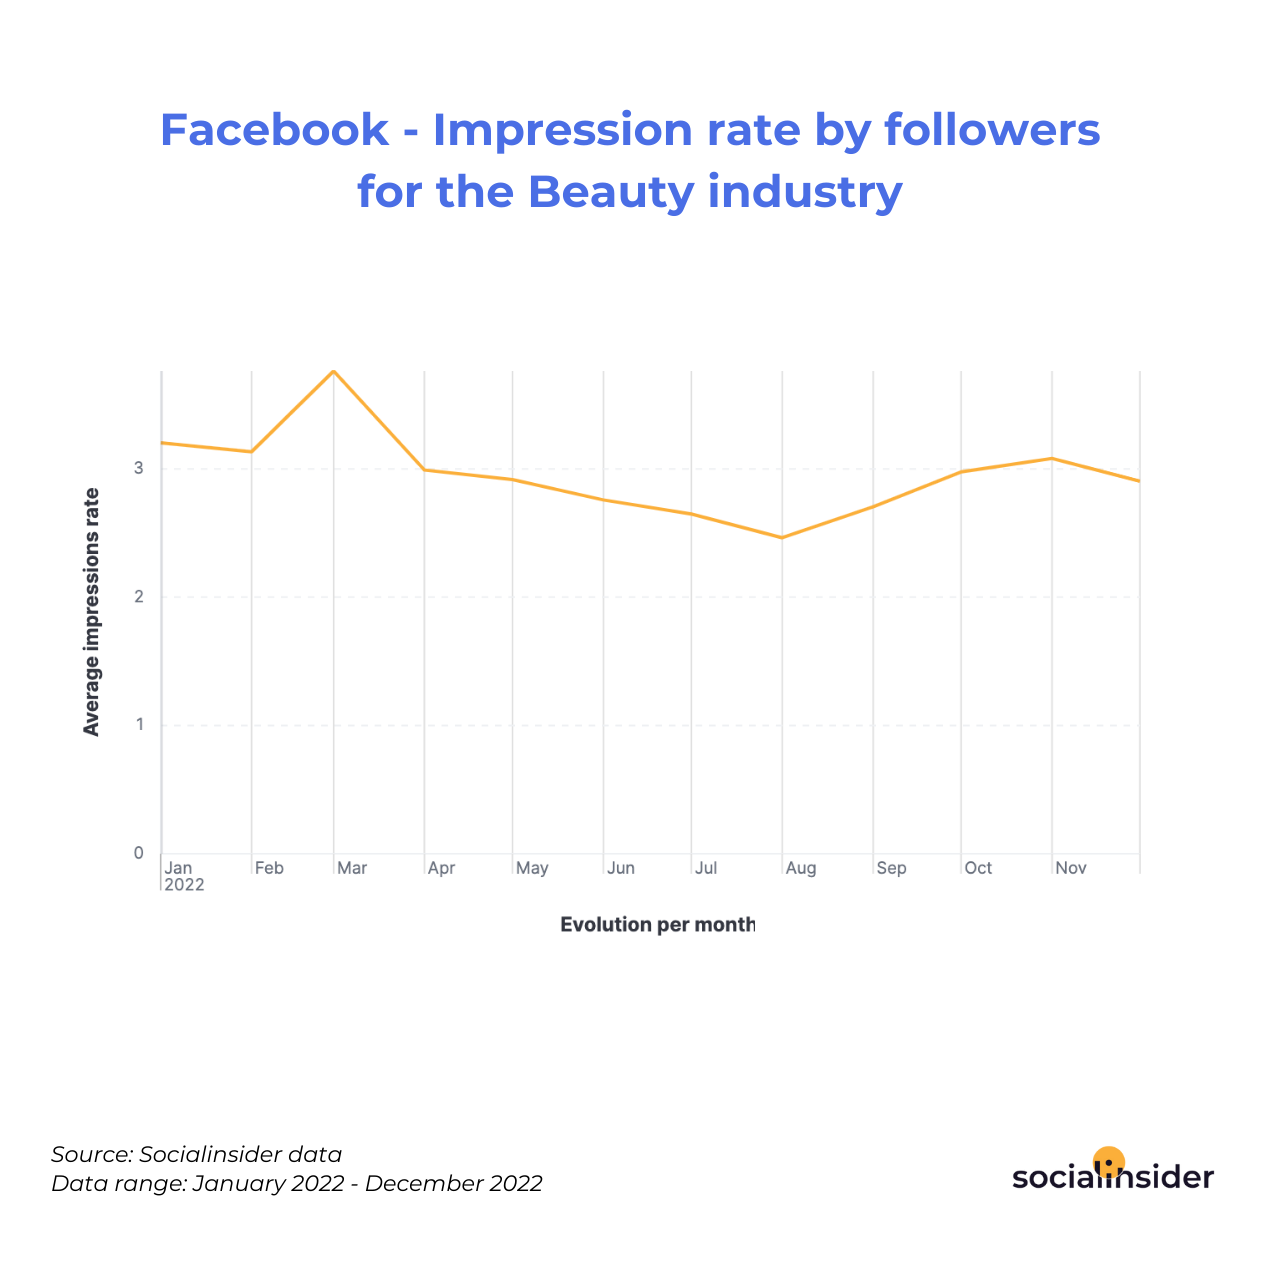 Facebook - Impression rate by followers for the Beauty industry 